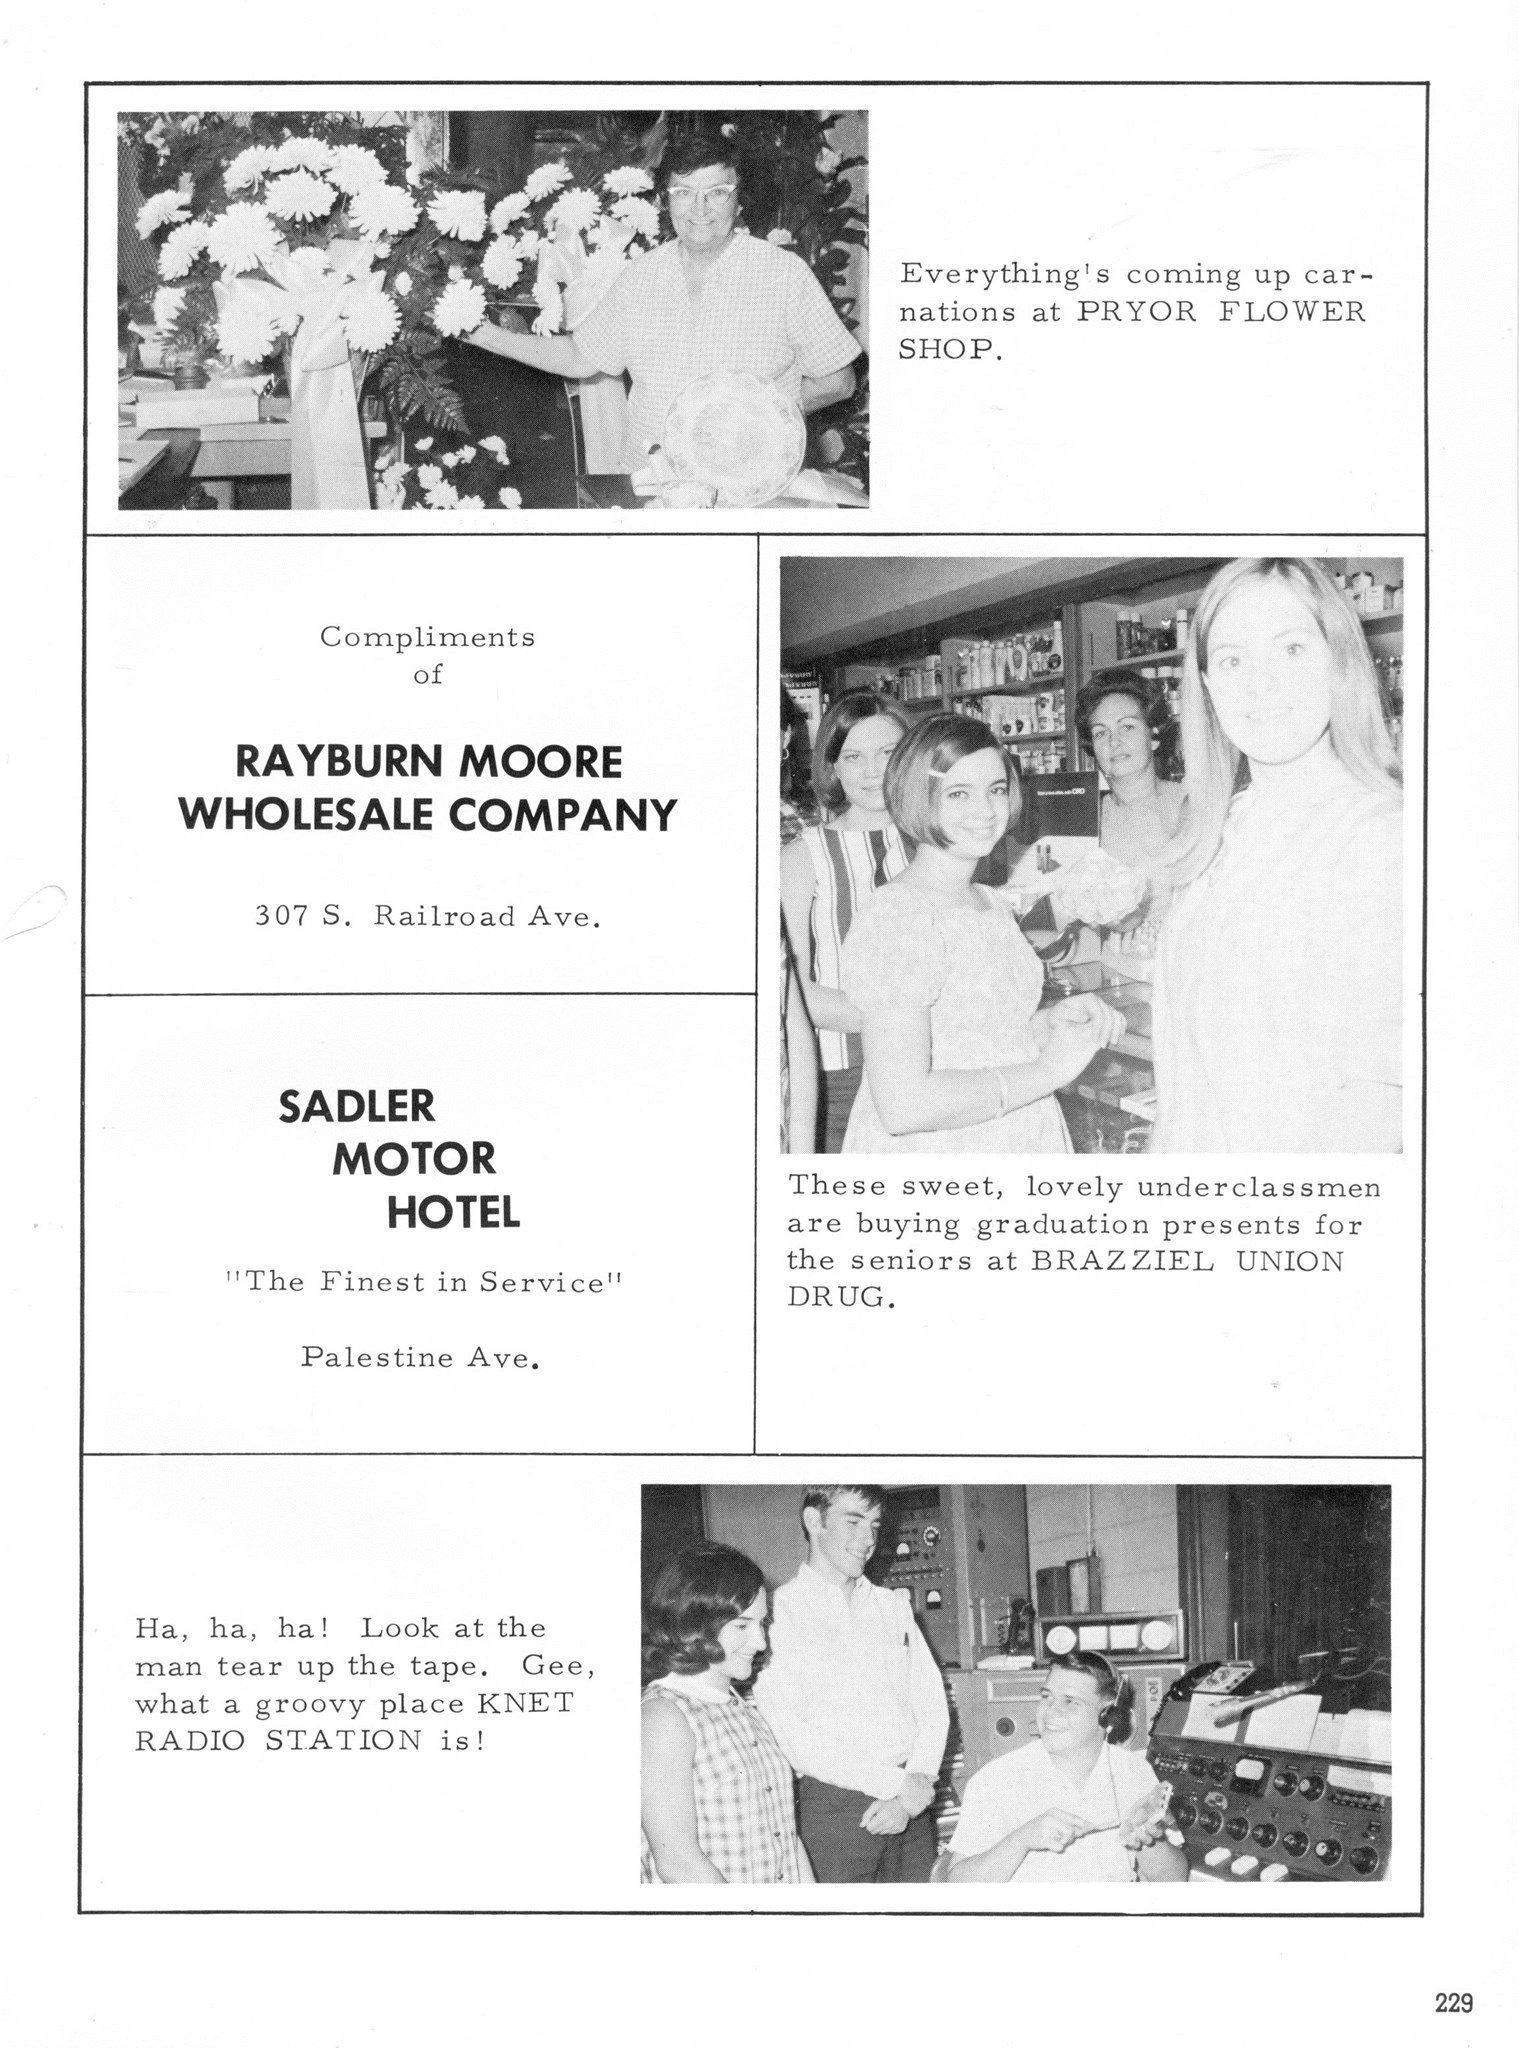 ../../../Images/Large/1968/Arclight-1968-pg0229.jpg